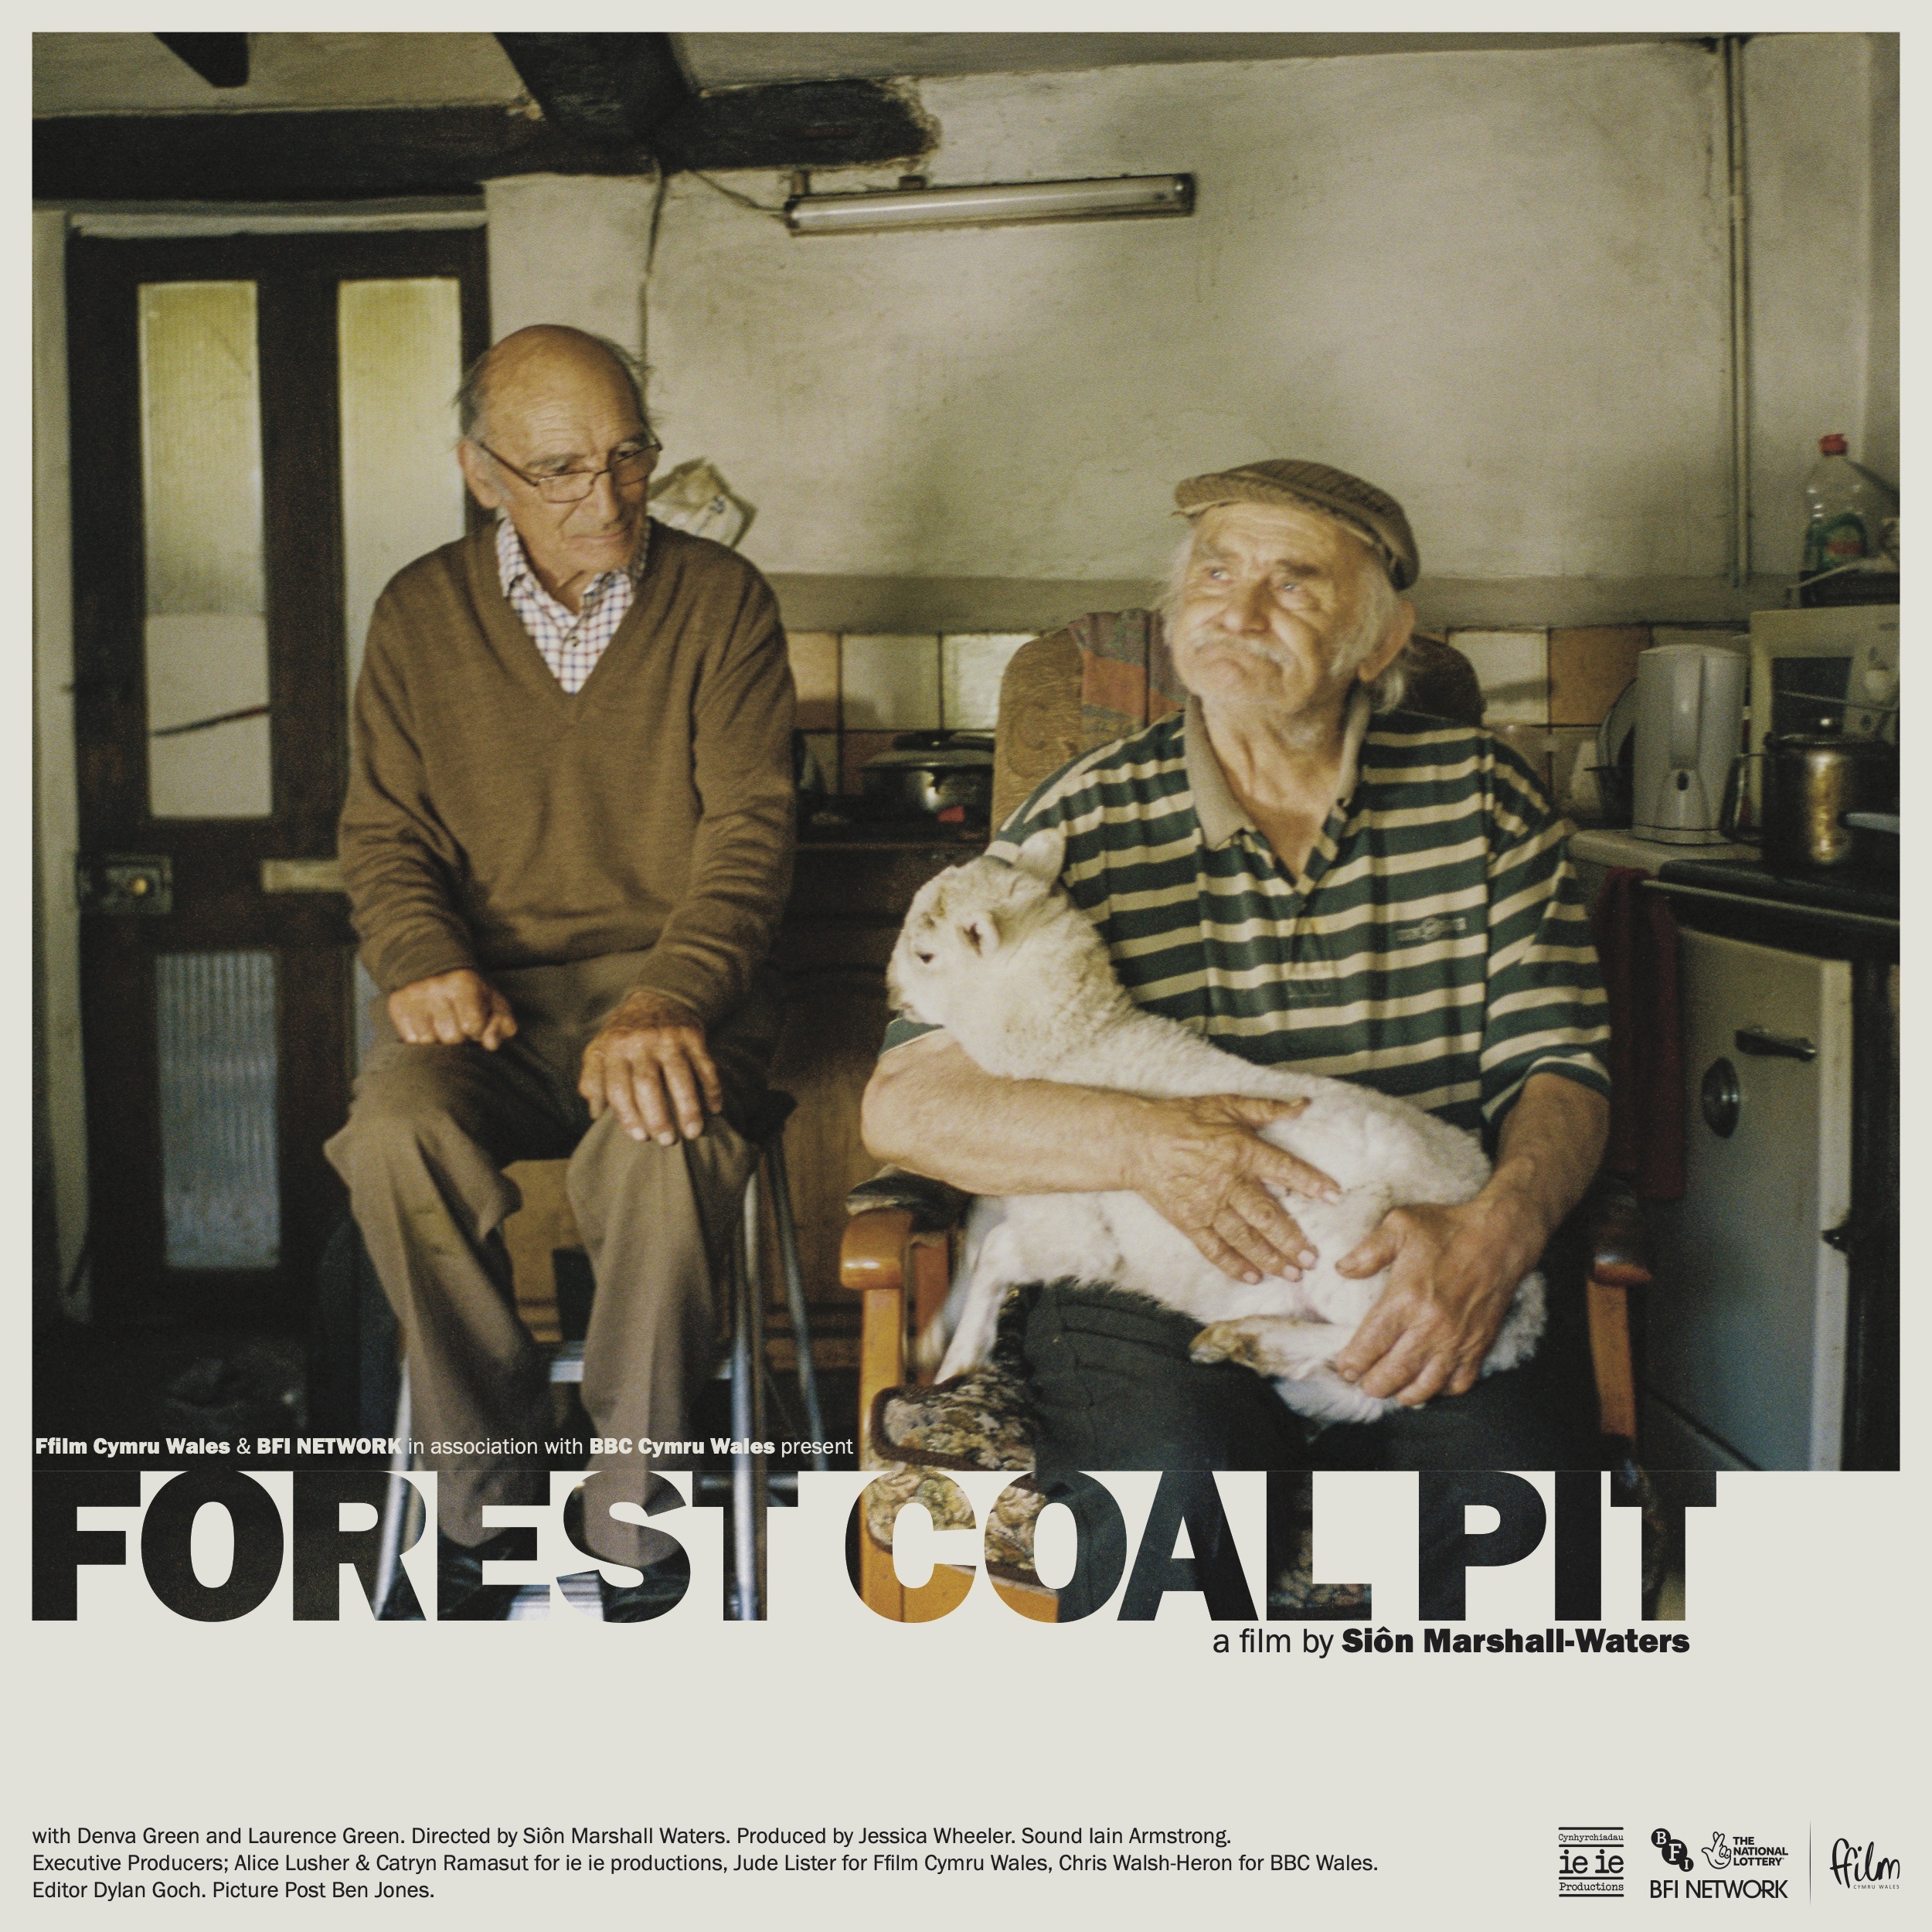 Publicity image for Forest Coal Pit film